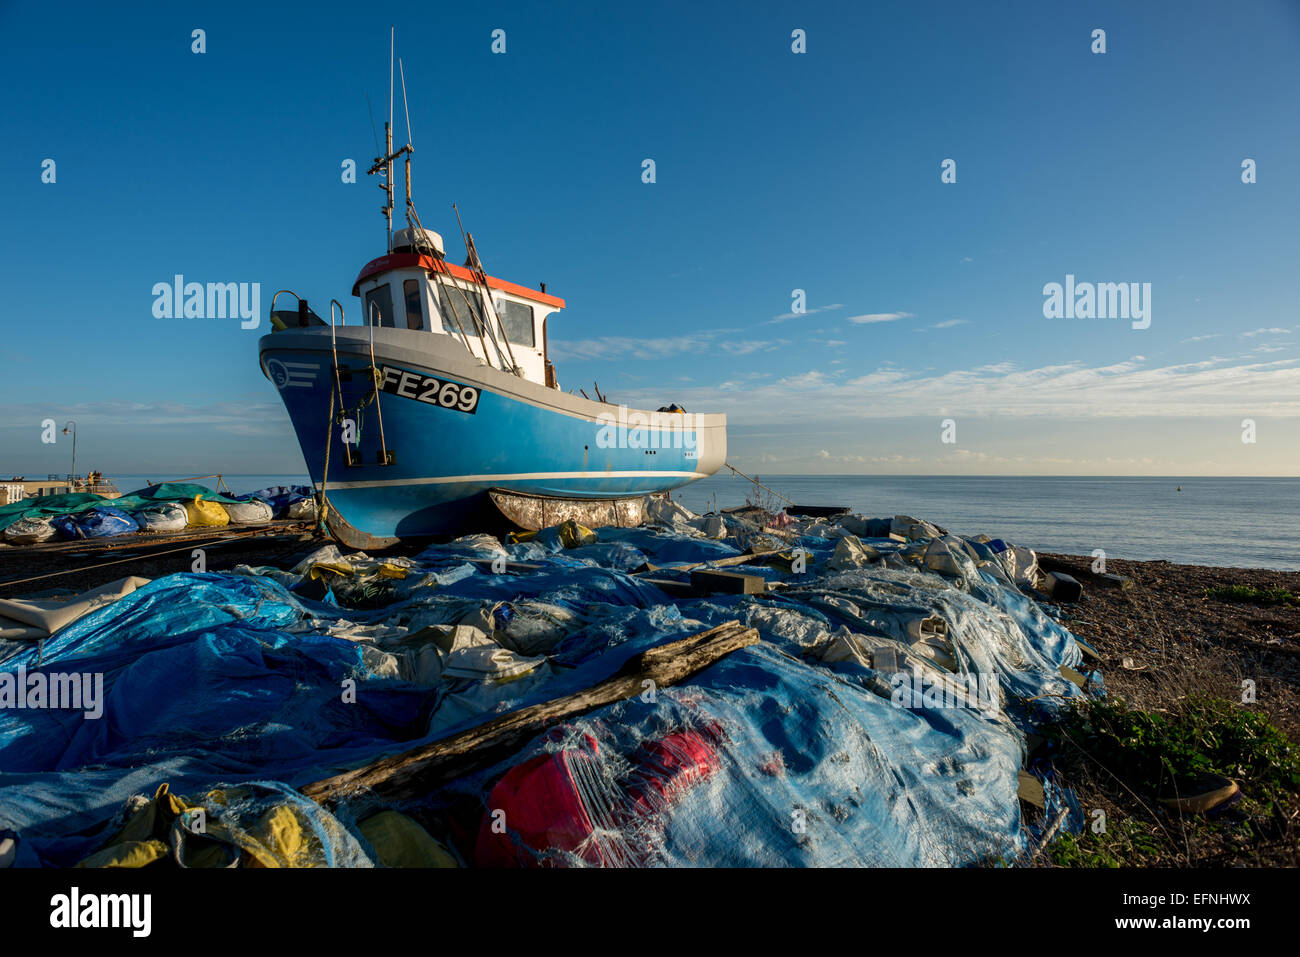 Fishing boat on the beach at Hythe, Kent. Stock Photo